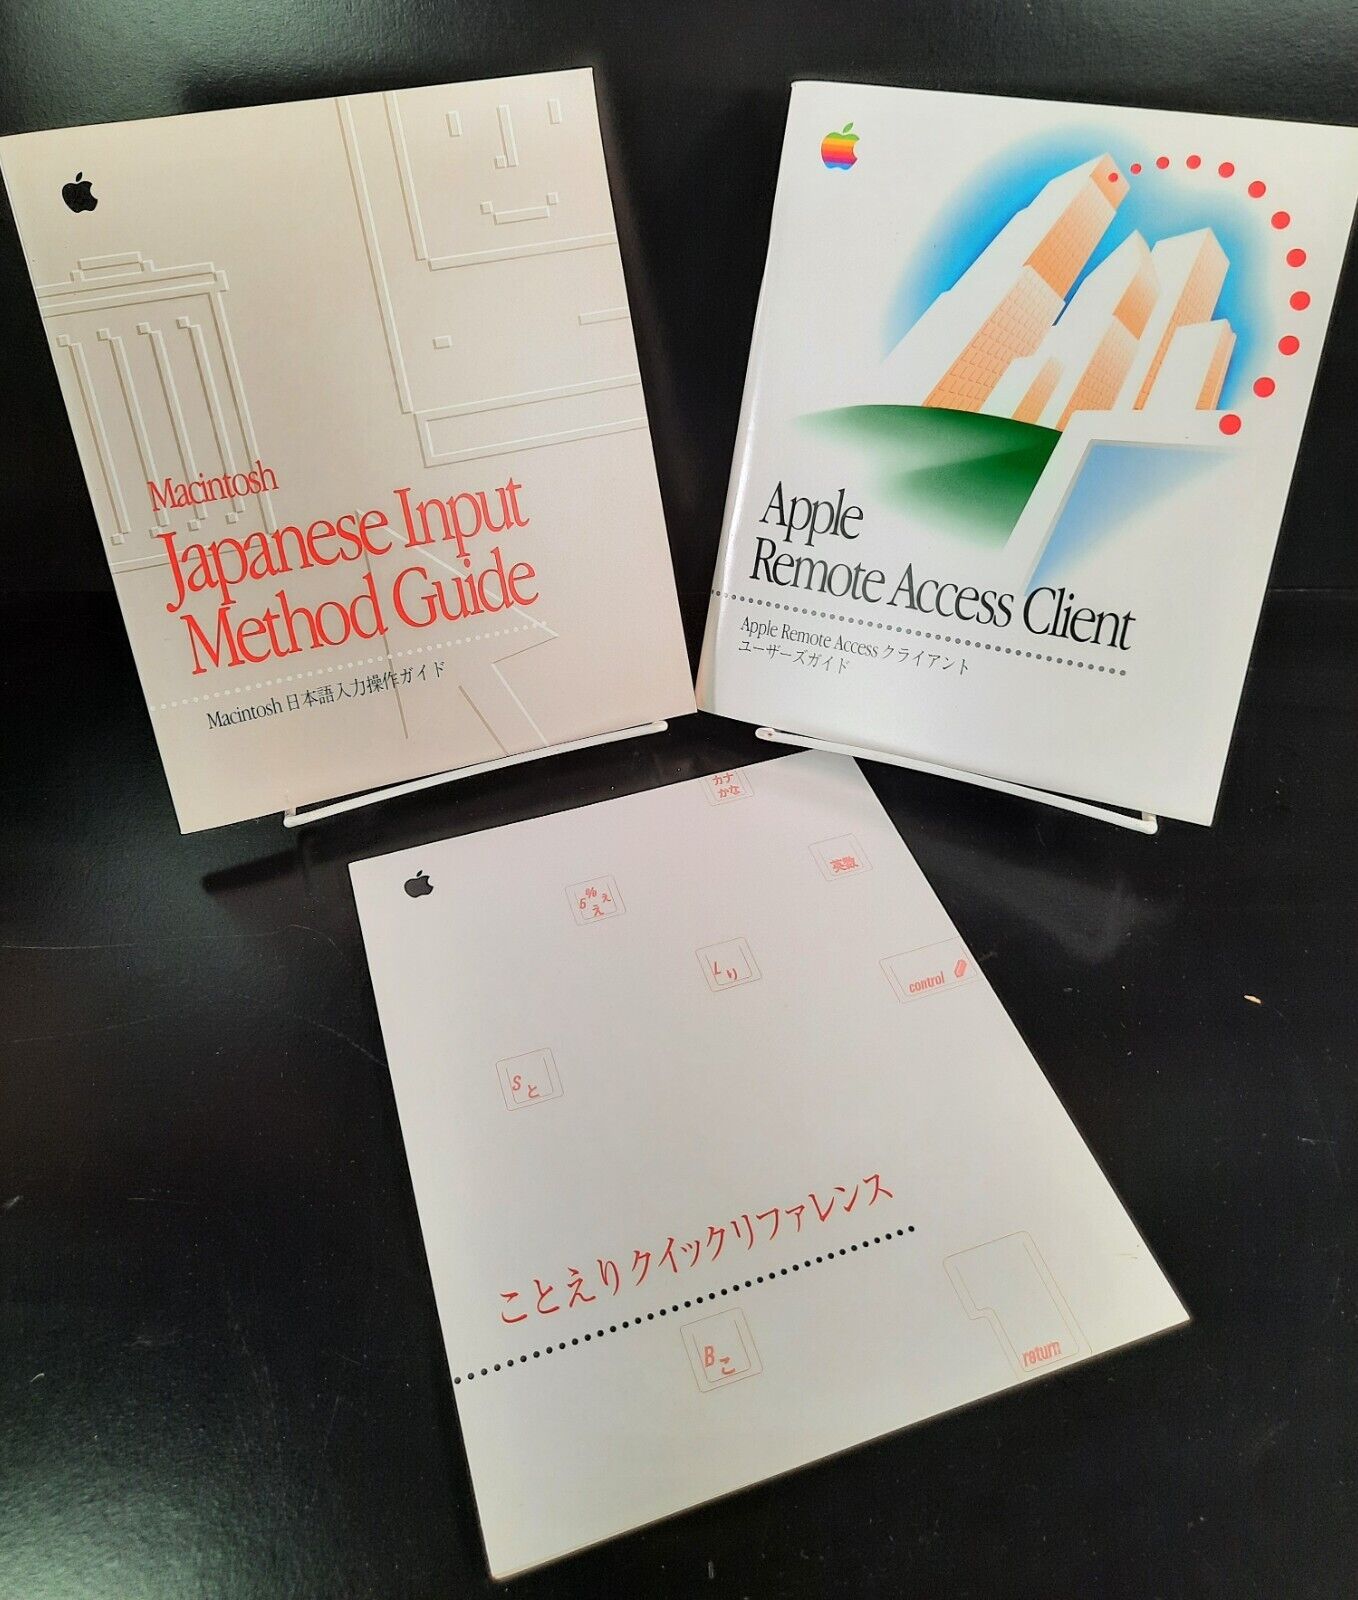 VTG 1995 Apple Macintosh Japanese Input Method Guide/Remote Access Client Manual